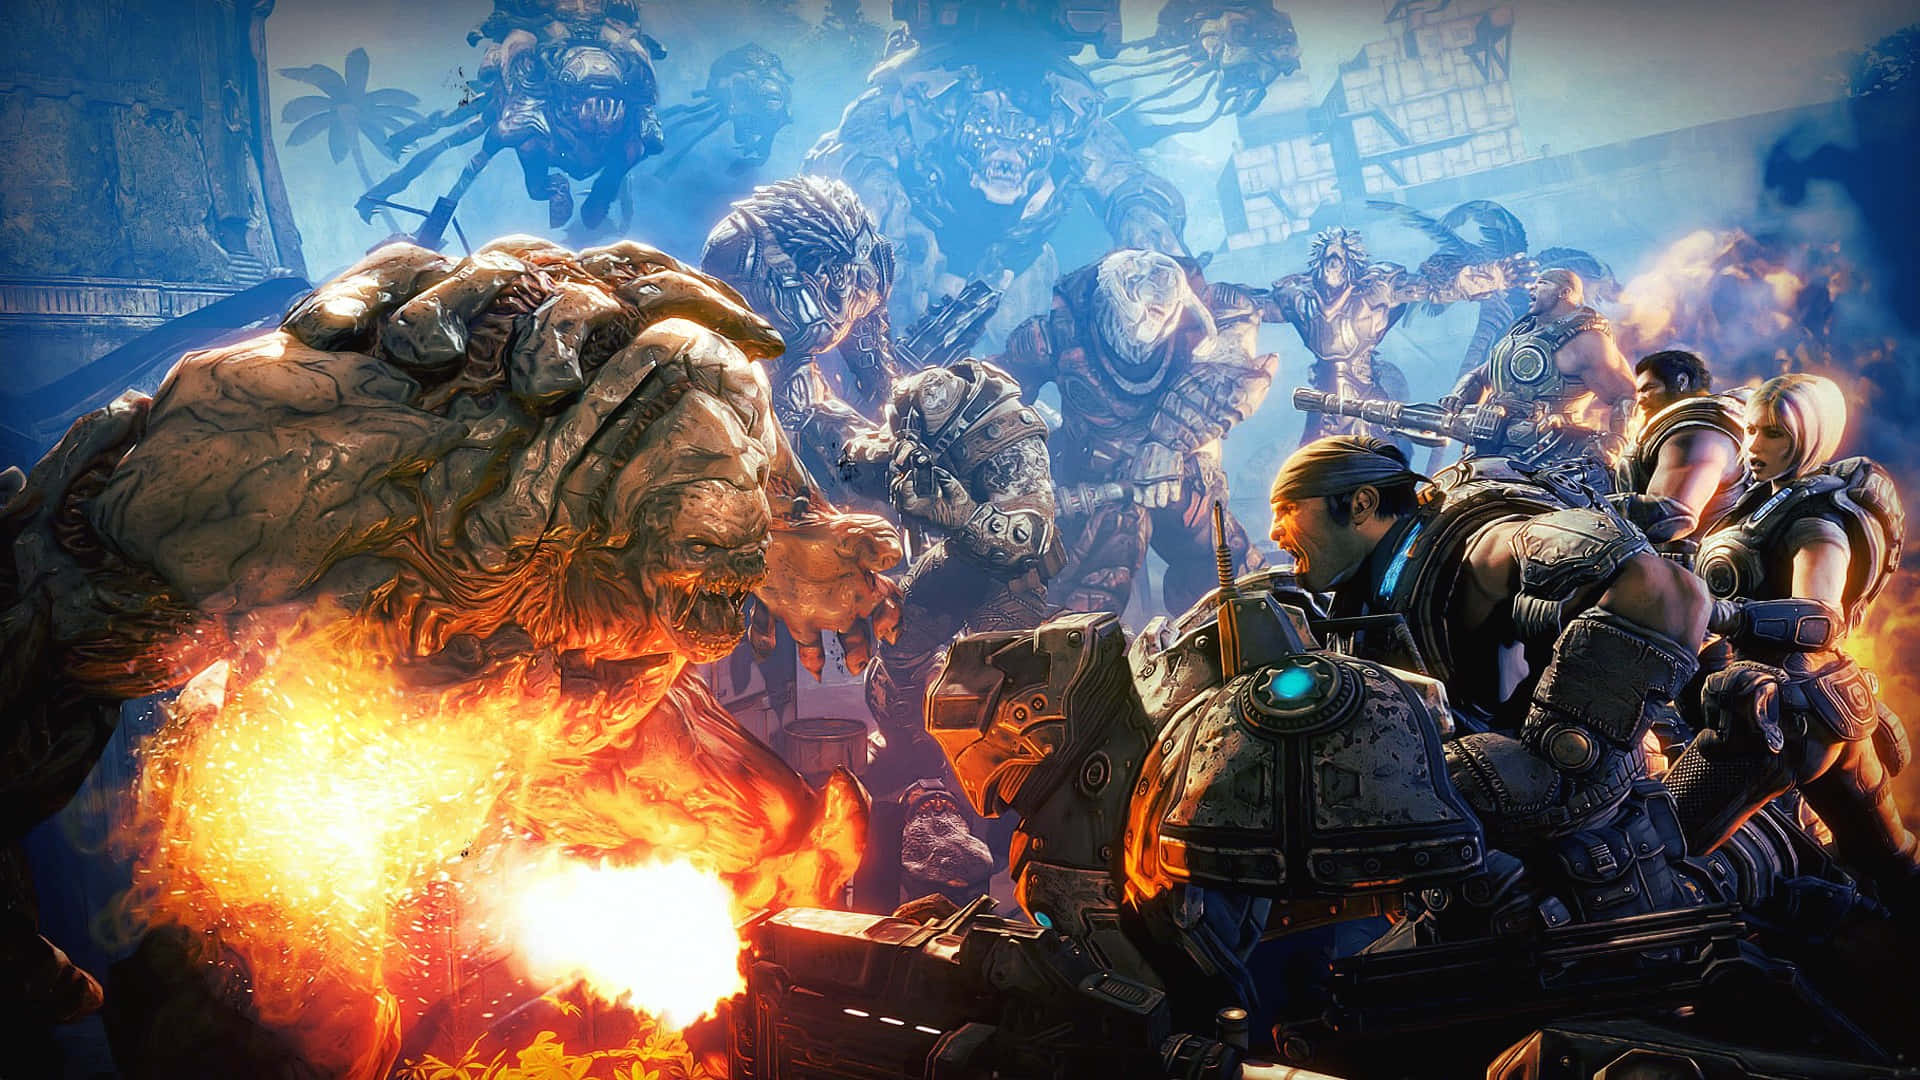 Play the Epic Action Shooter, Gears of War 5